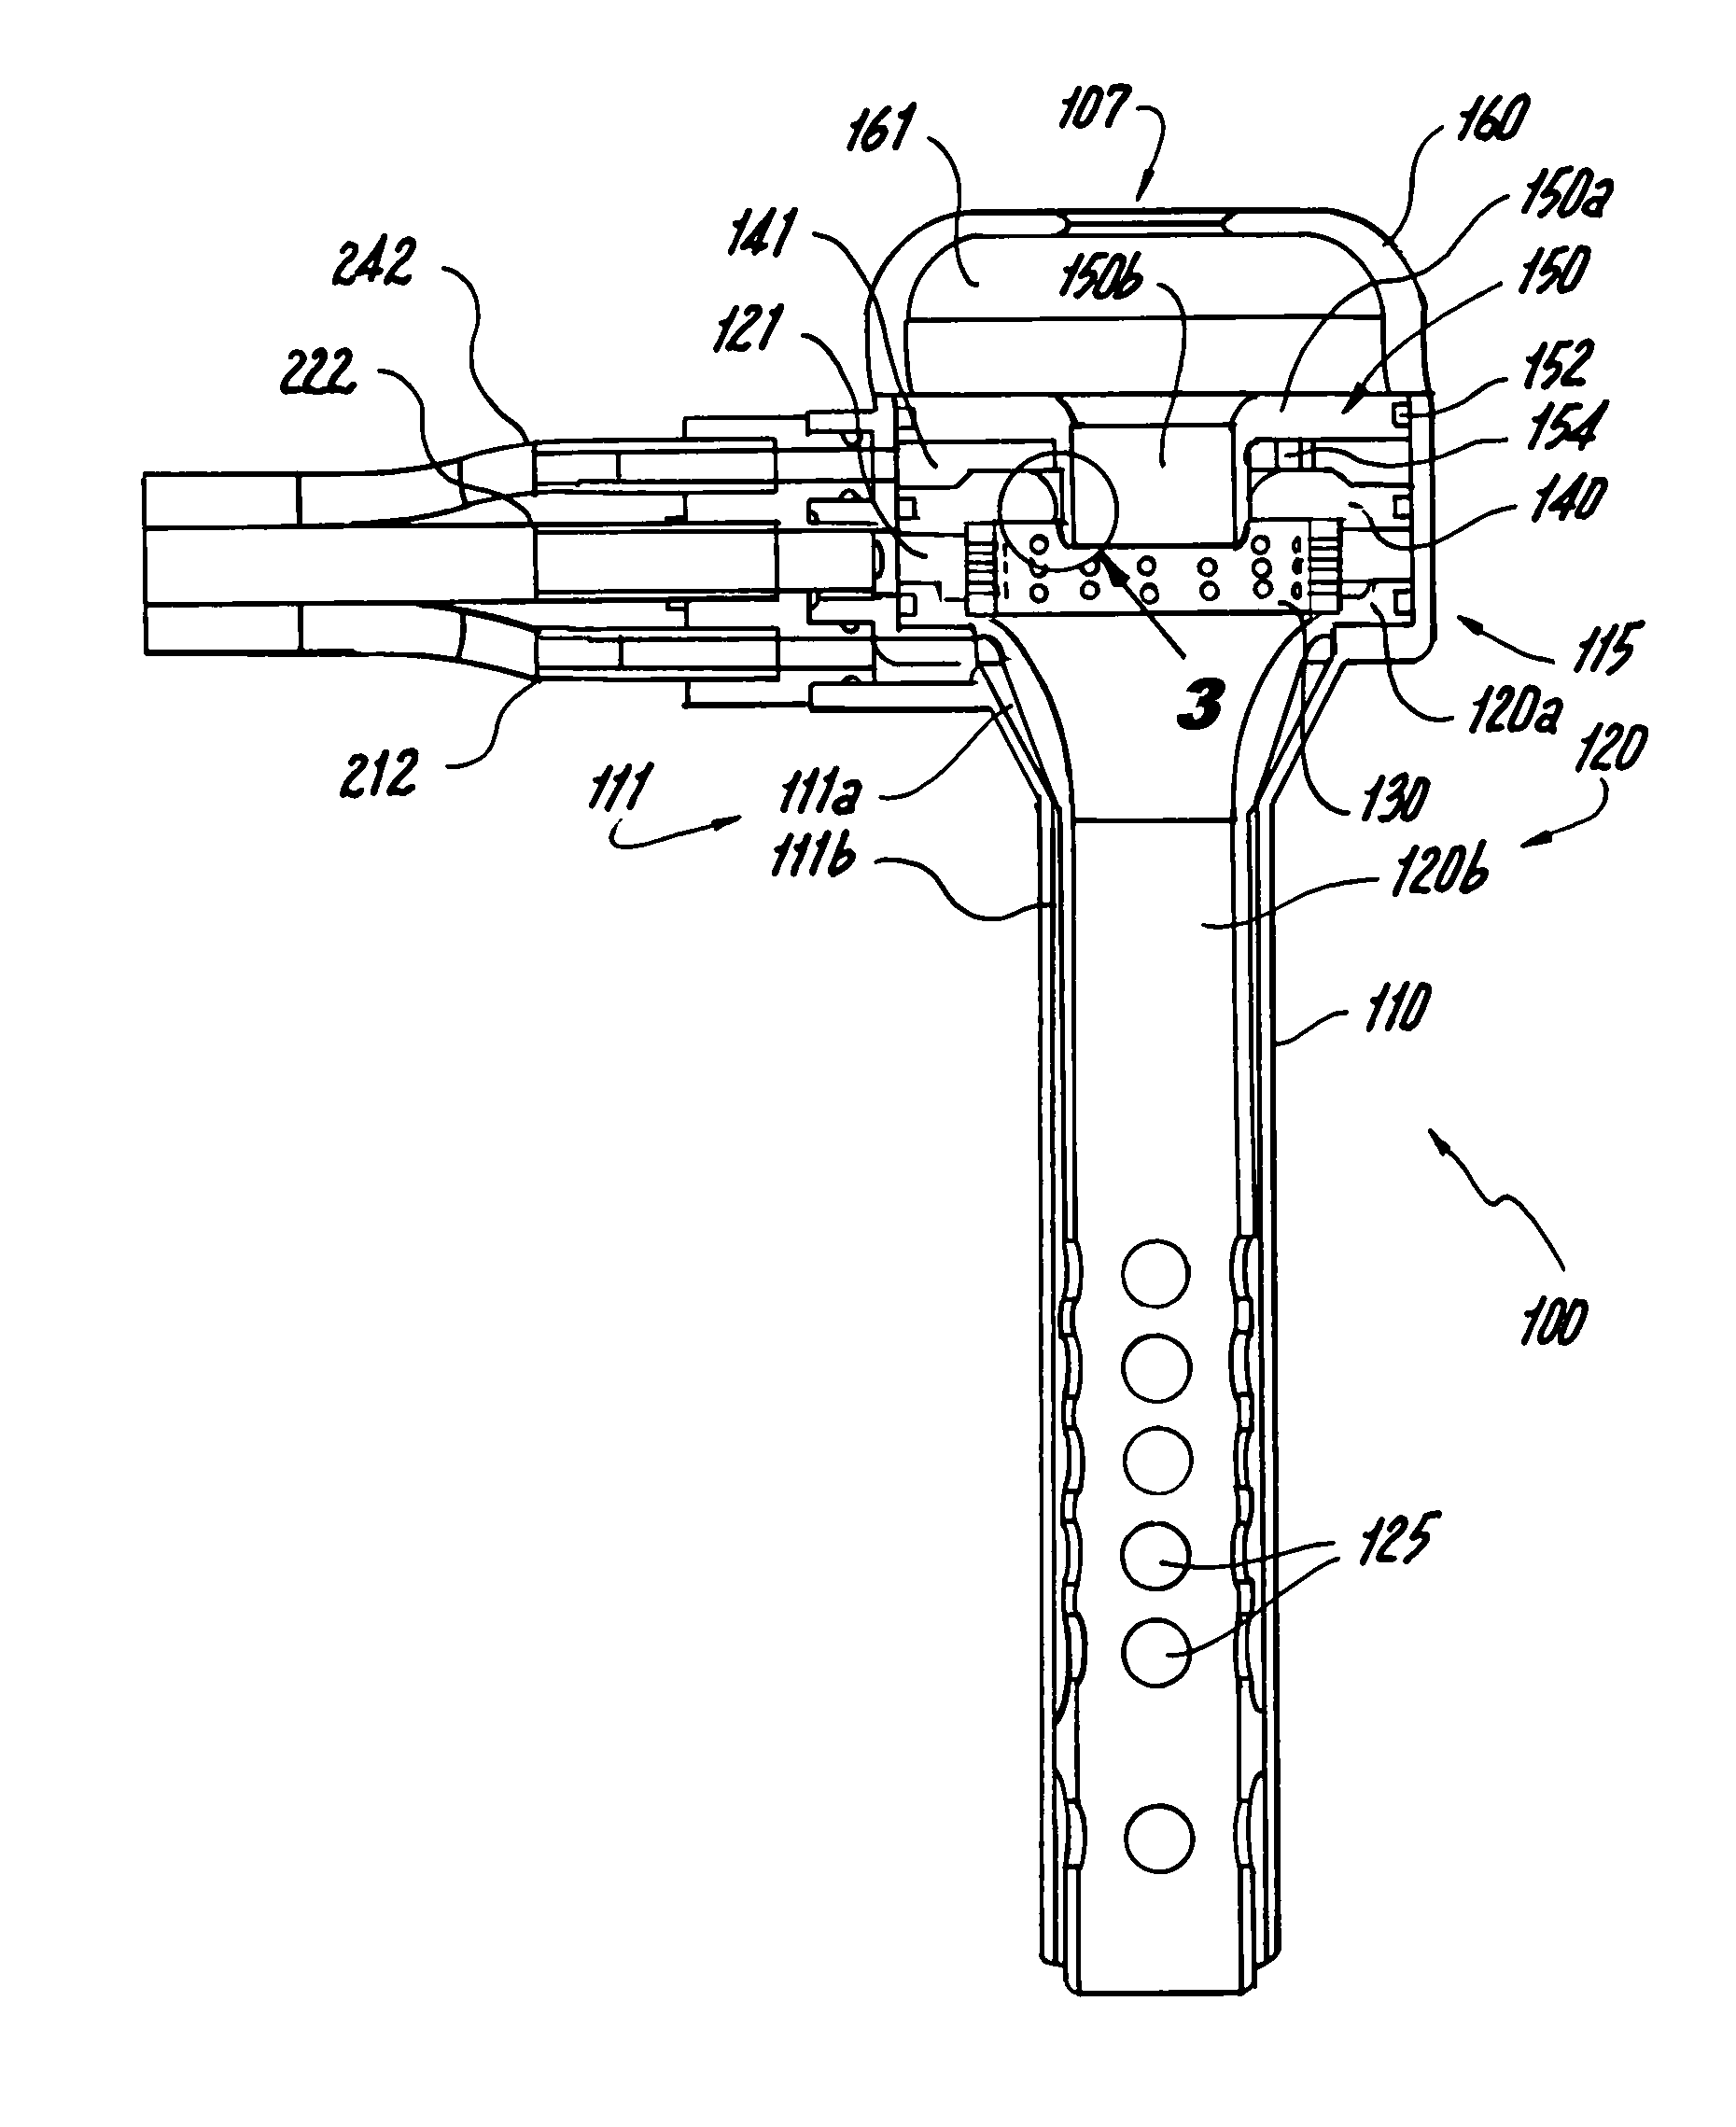 System and method for improved gas recirculation in surgical trocars with pneumatic sealing